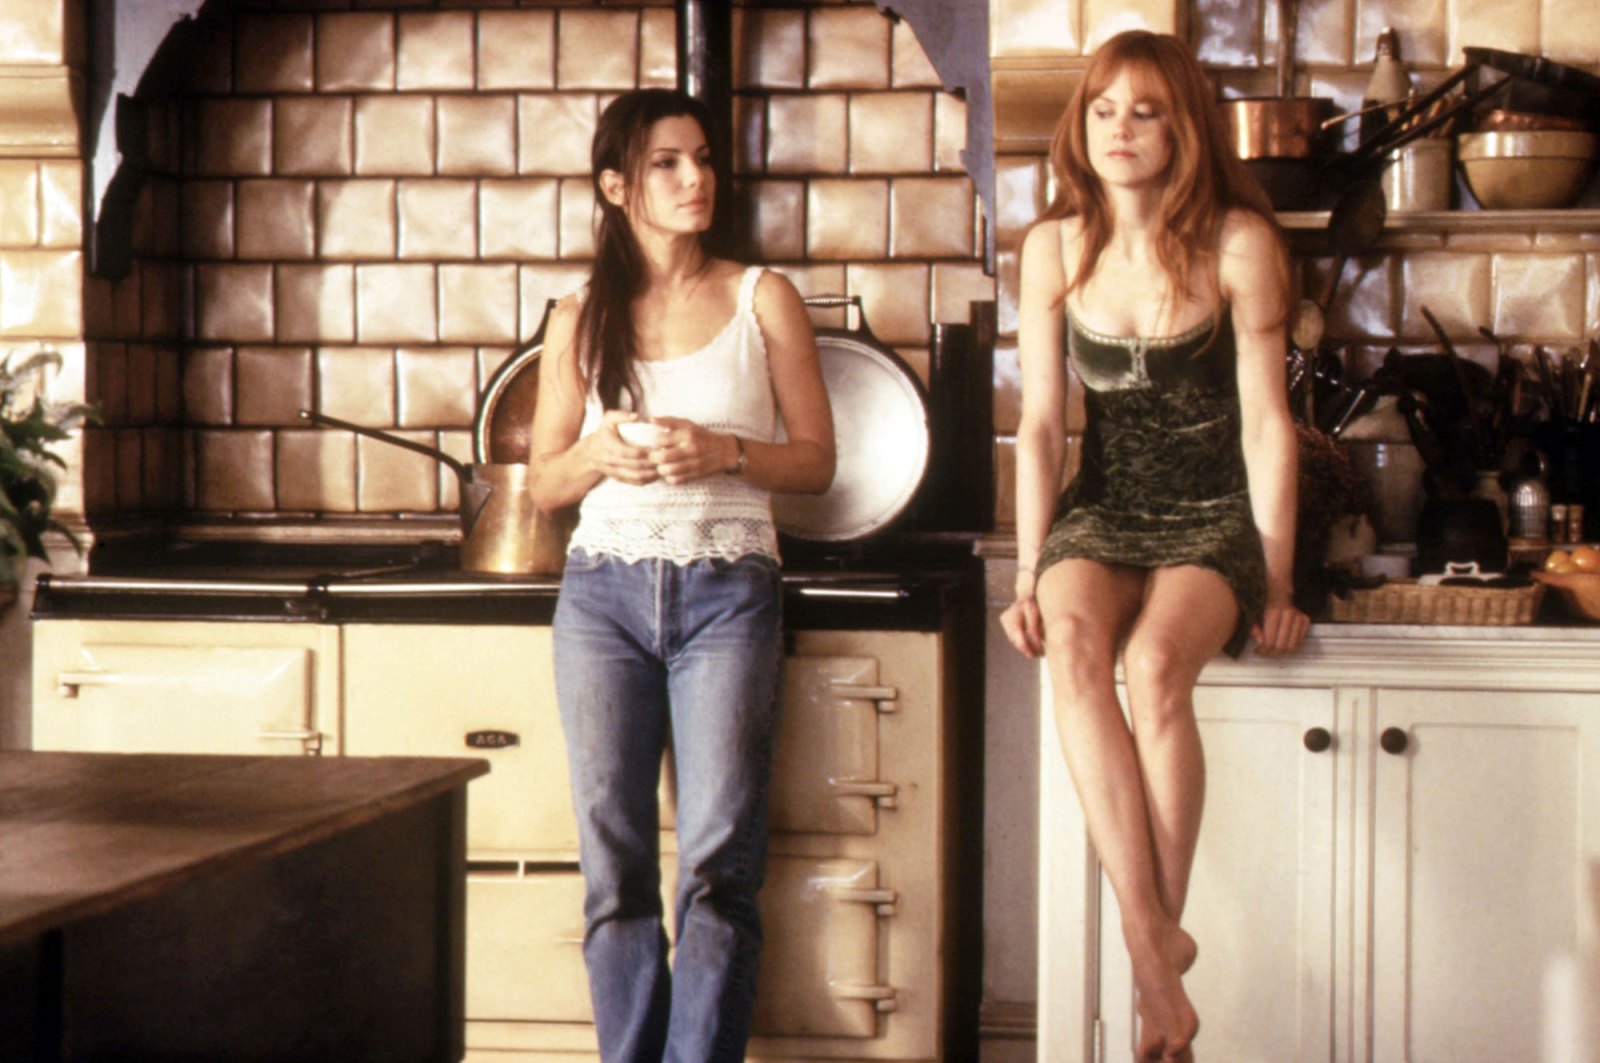 Practical Magic’ Cast: Where Are They Now? Sandra Bullock, Nicole Kidman and More